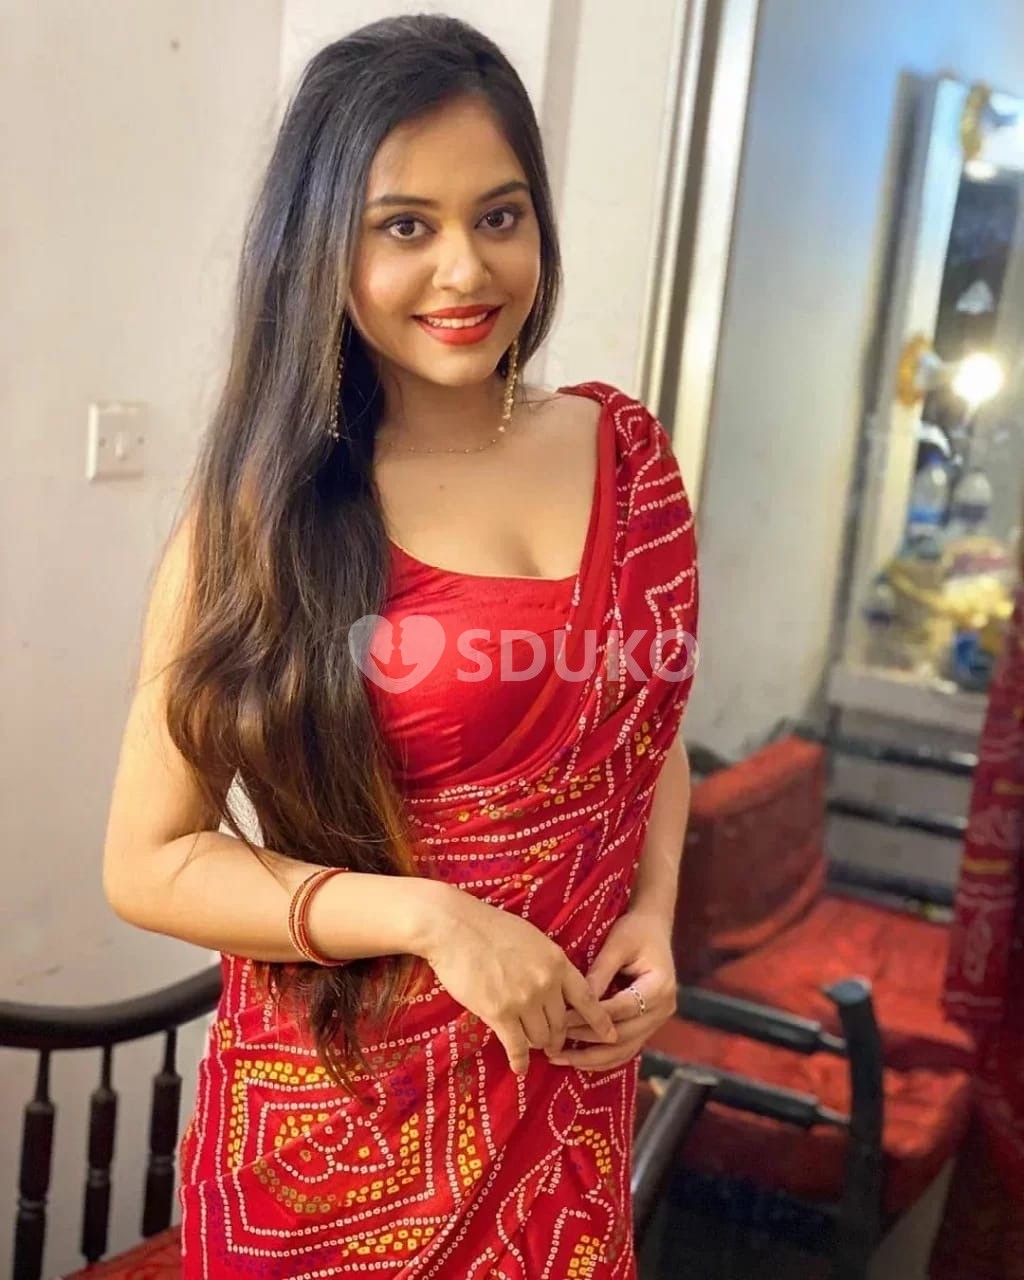 MUMBAI 📞VIP BEST ESCORT  ❣️ HARD SEX DOORSTEP OUT CALL IN CALL GIRLS AND HOUSE WIFE AVAILABLE